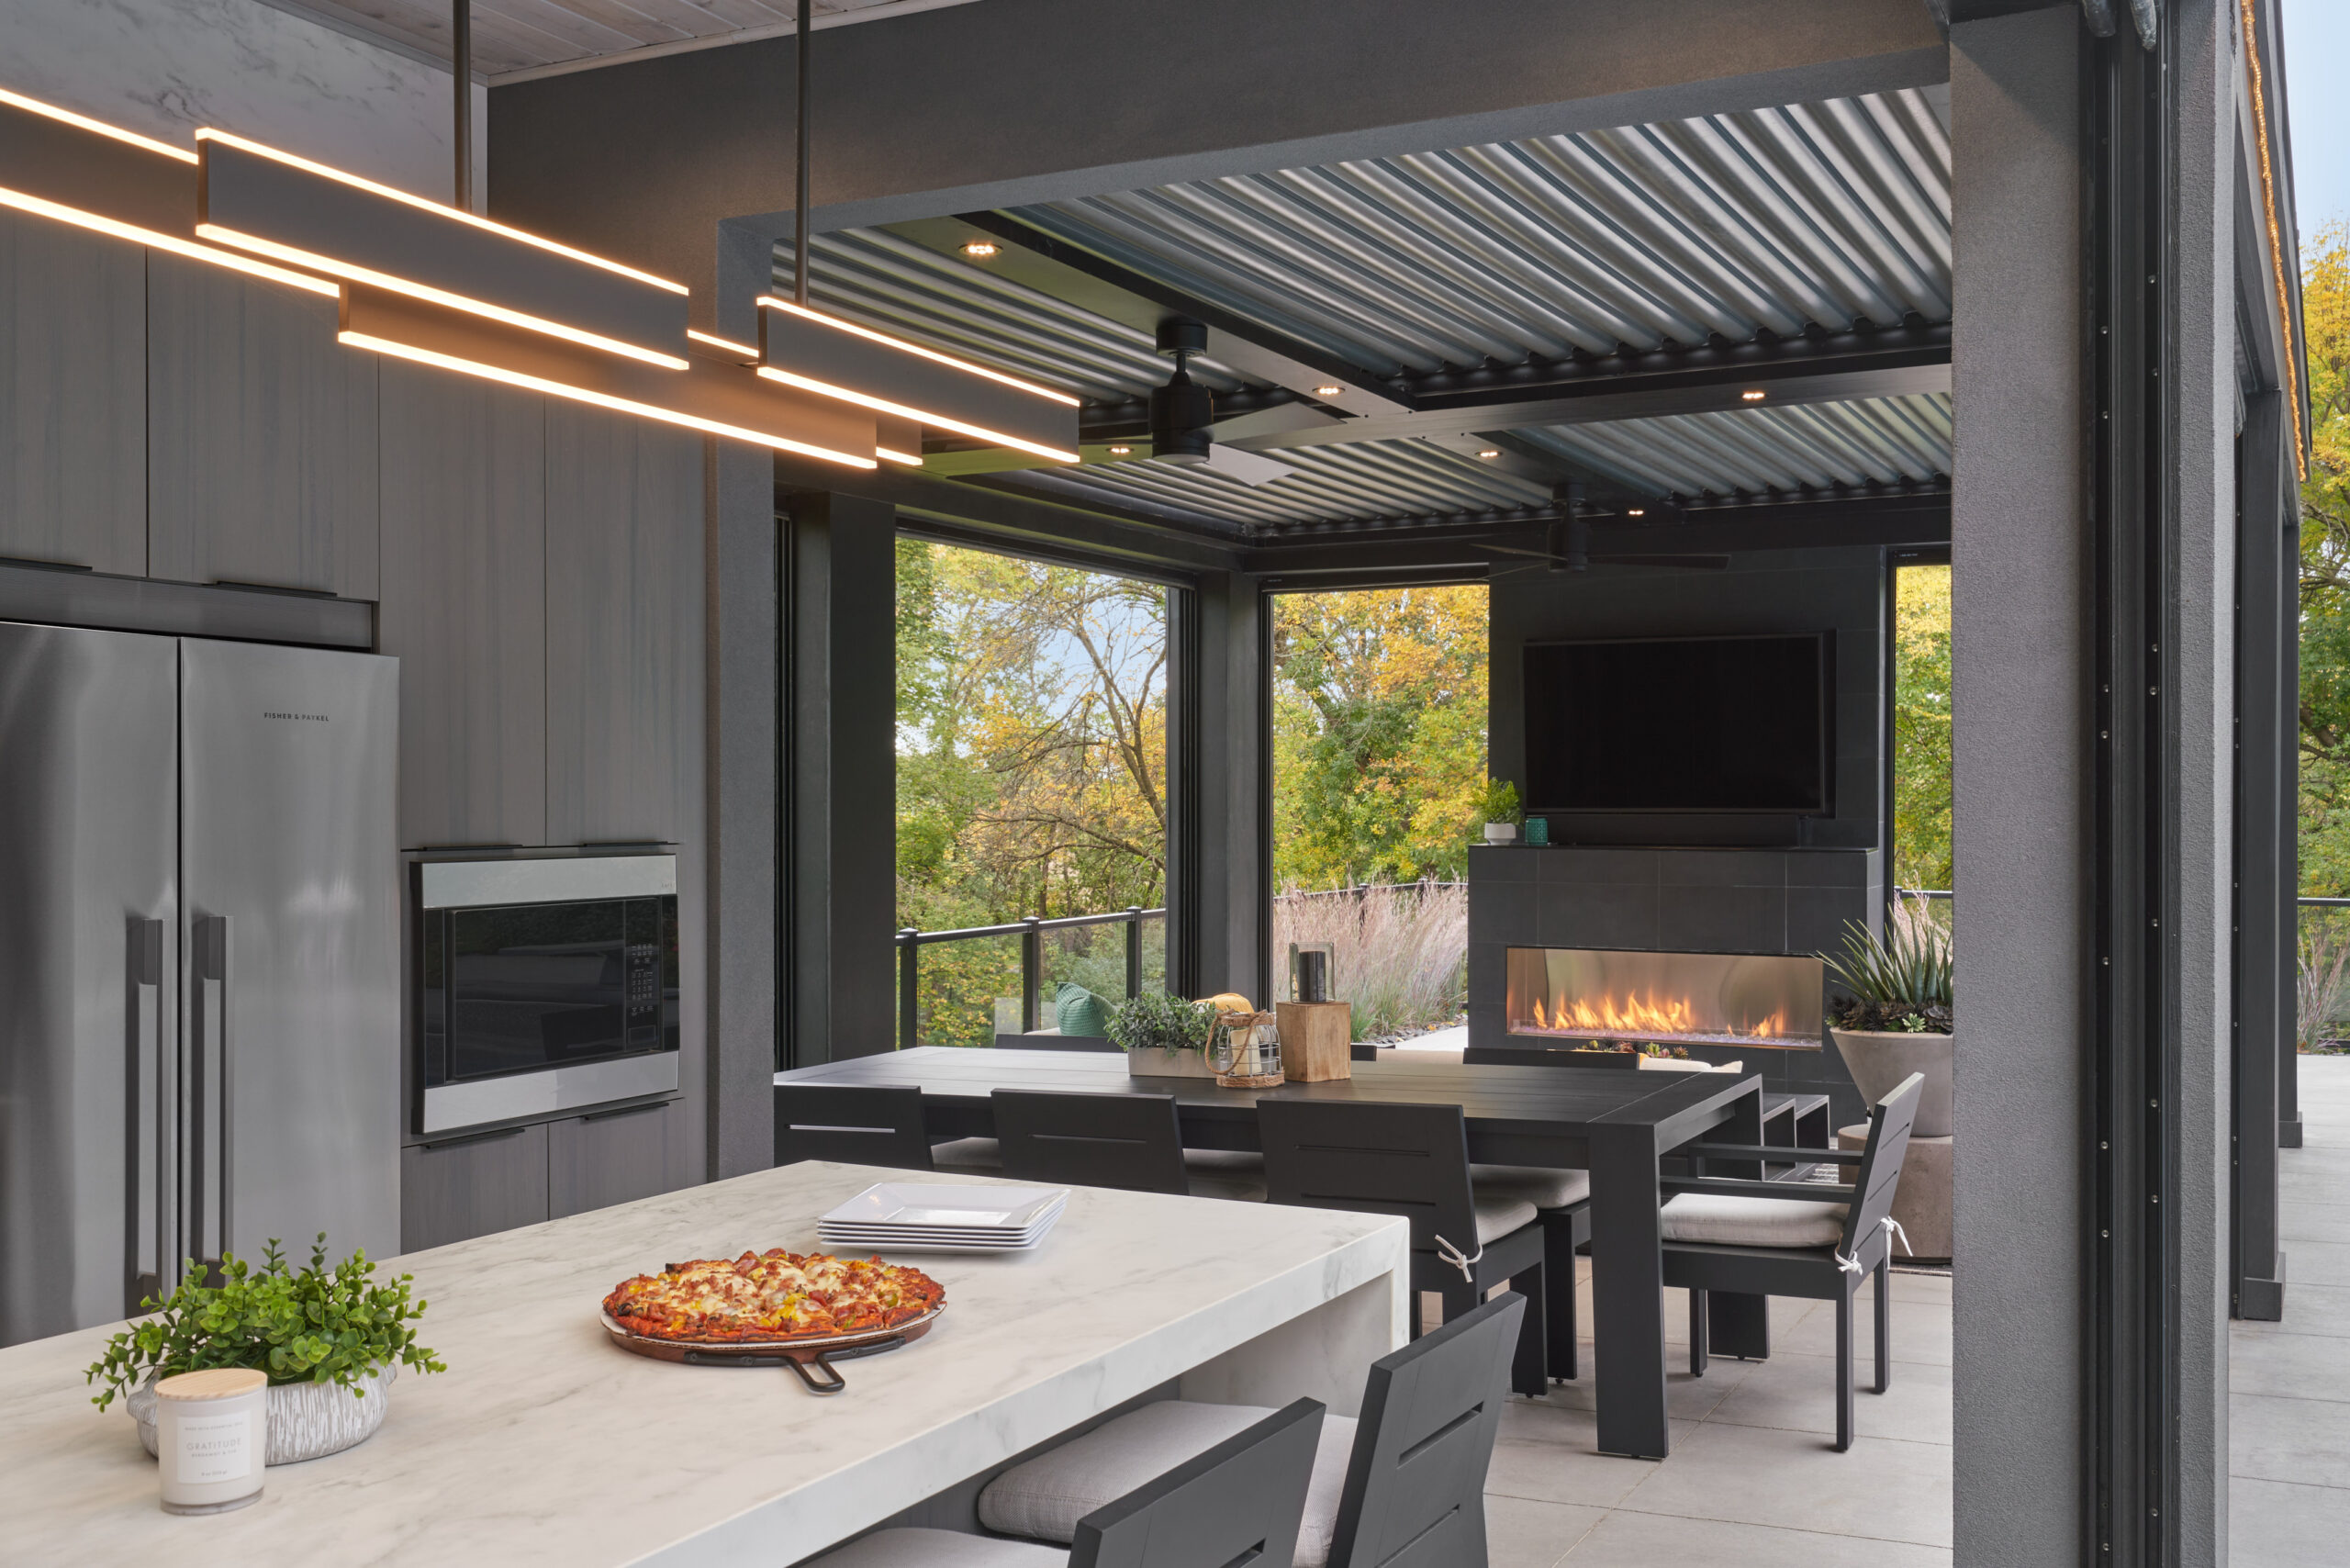 Contemporary outdoor kitchen - part of poolhouse project - Louvers closed.